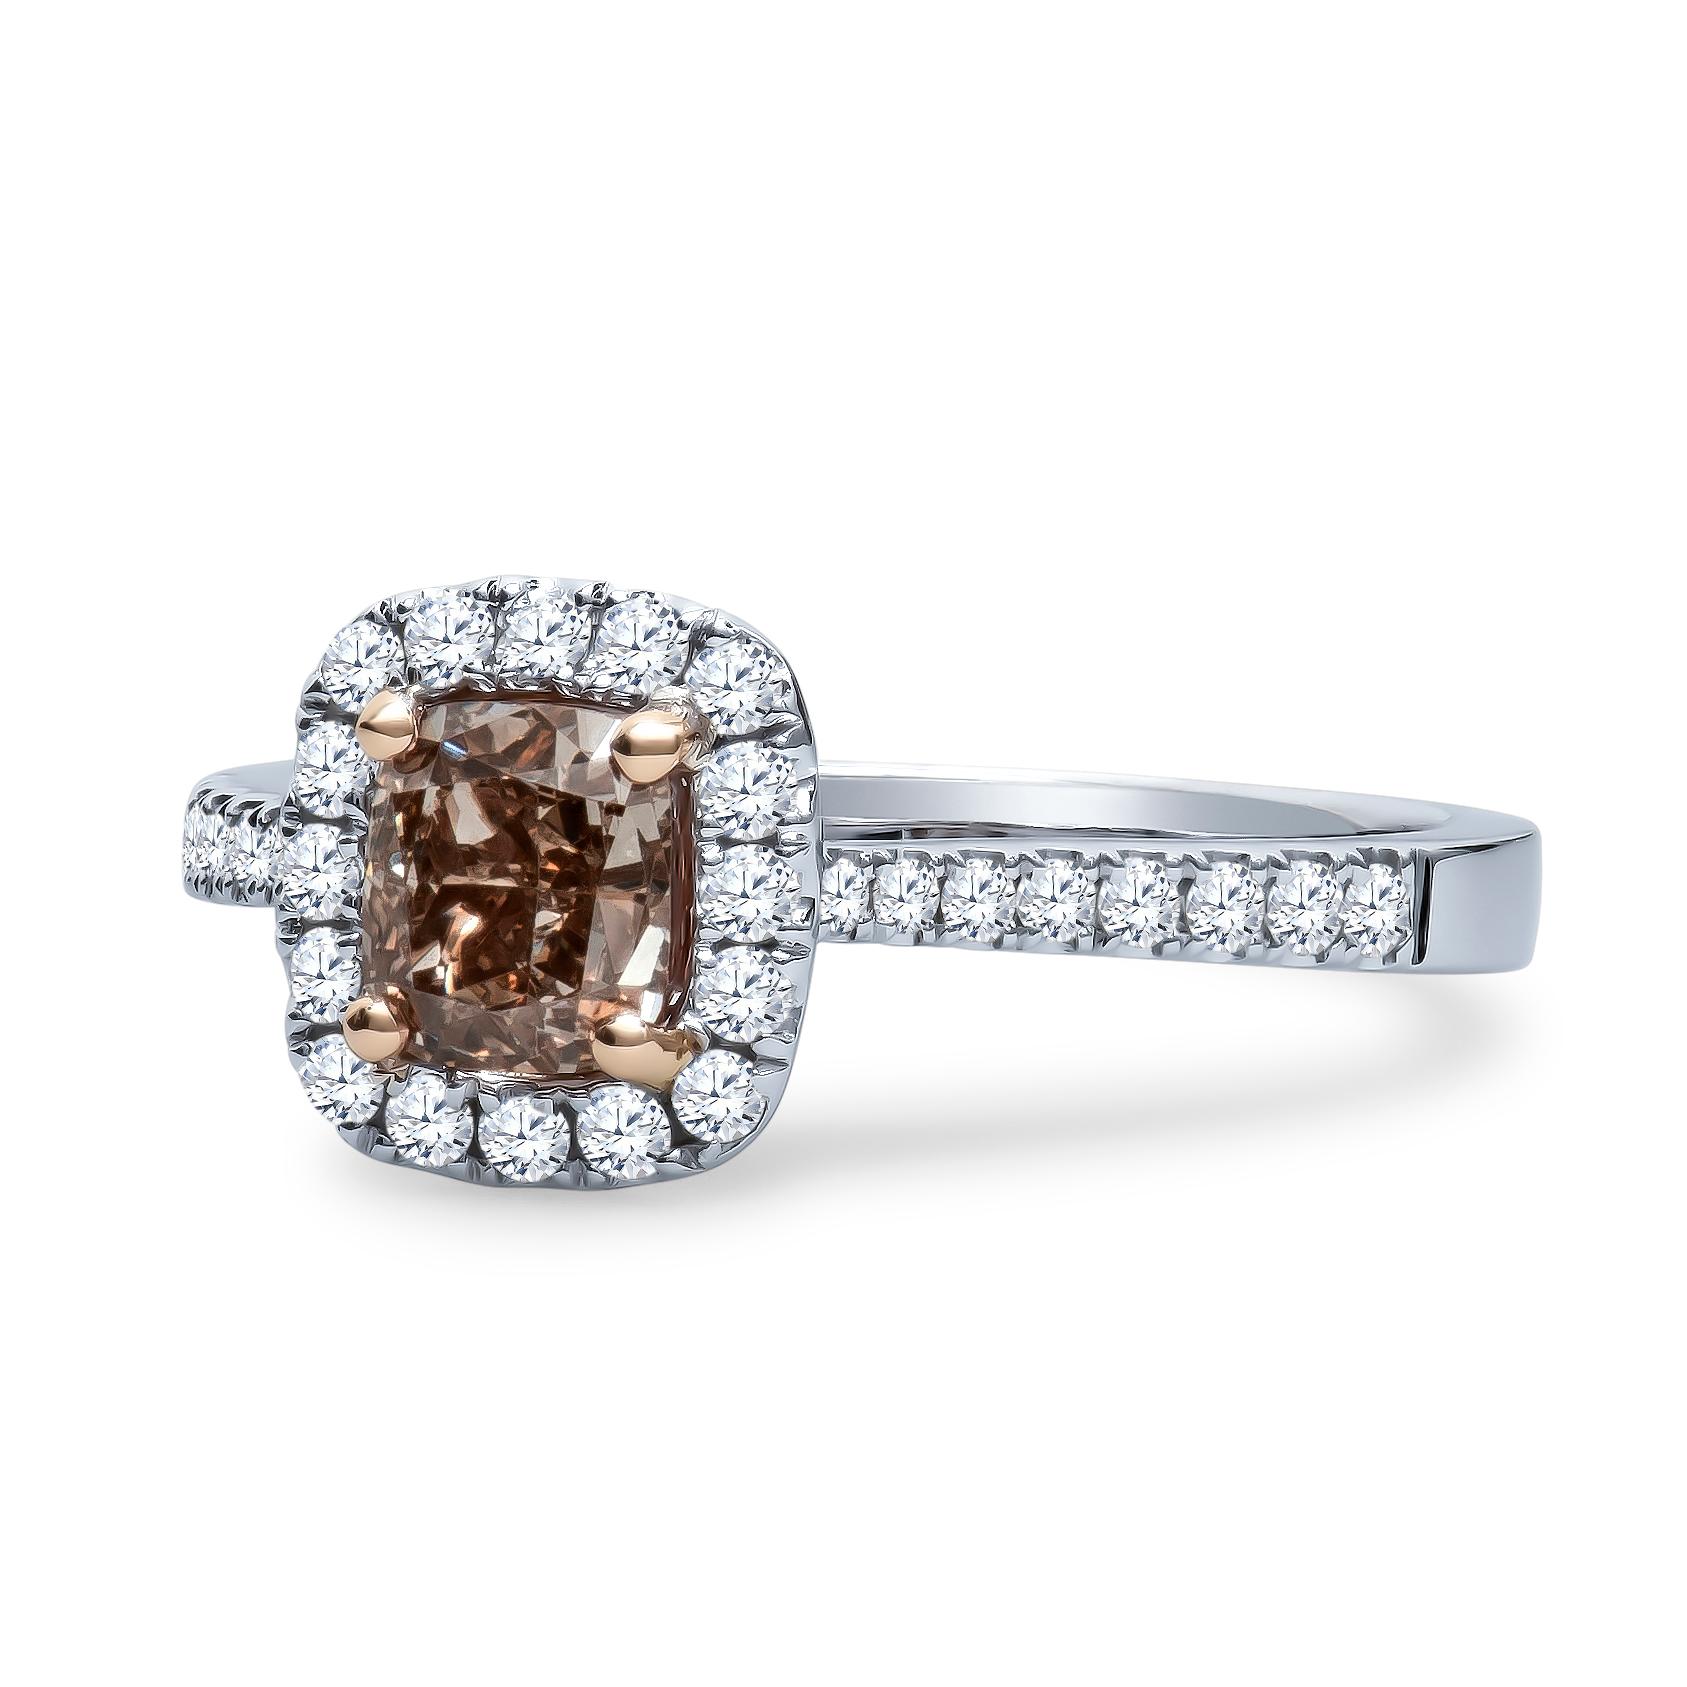 Beautiful 1.00 Carat , GIA certified, SI1 fancy orange brown diamond with 0.34 carats total of split prong set round brilliant diamonds set in an 18K white gold cathedral ring. Ring is sized 6.5, may be resized to larger or smaller upon